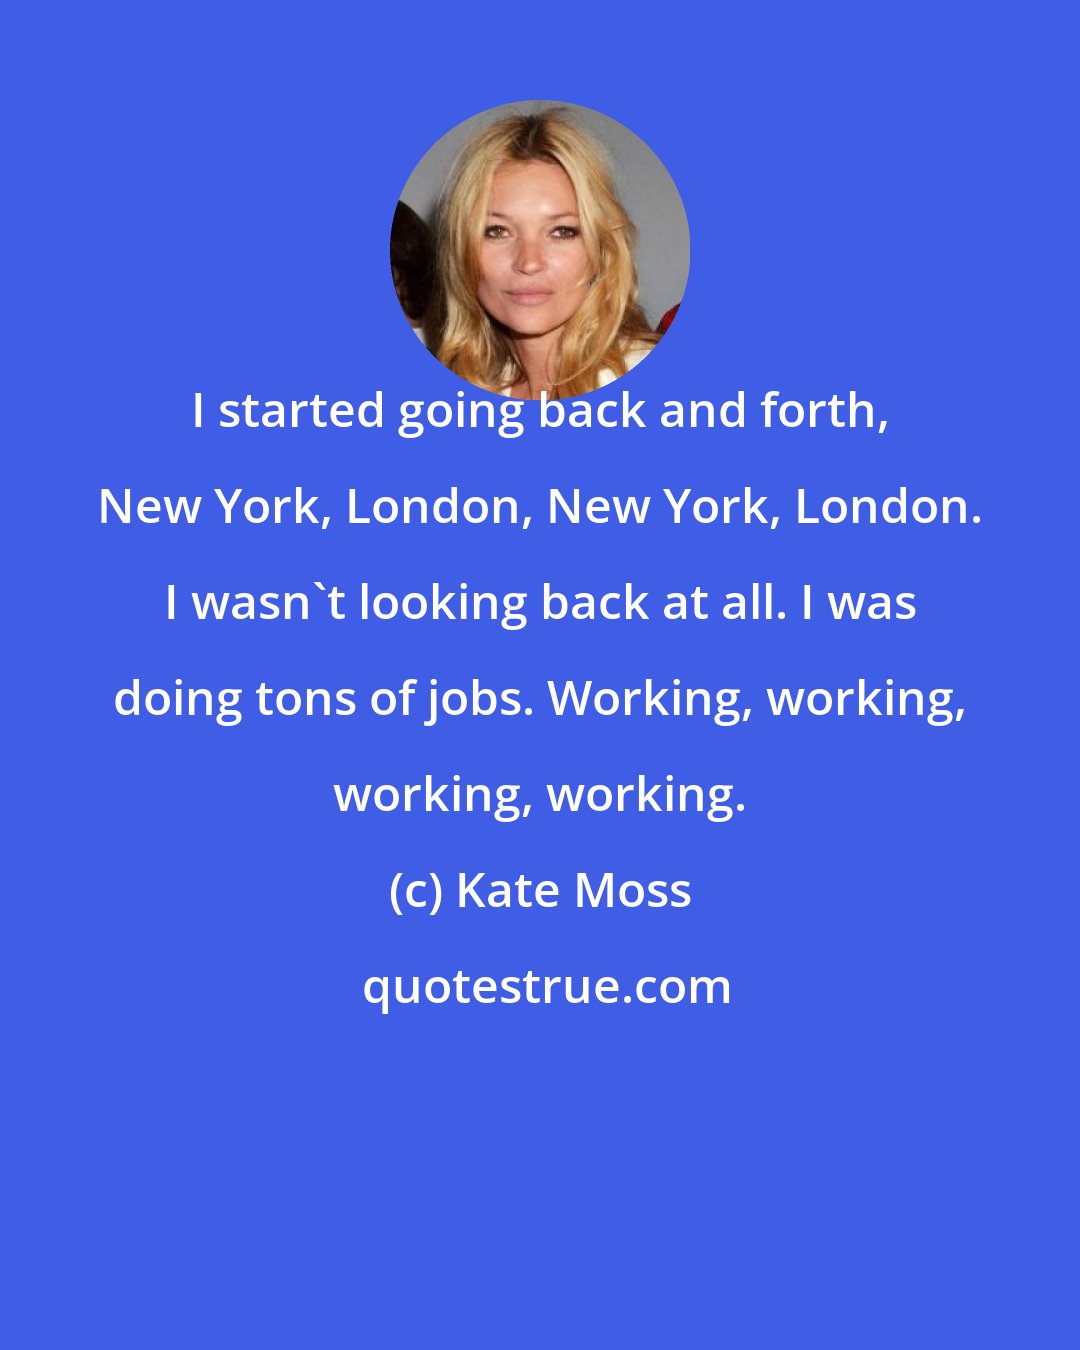 Kate Moss: I started going back and forth, New York, London, New York, London. I wasn't looking back at all. I was doing tons of jobs. Working, working, working, working.